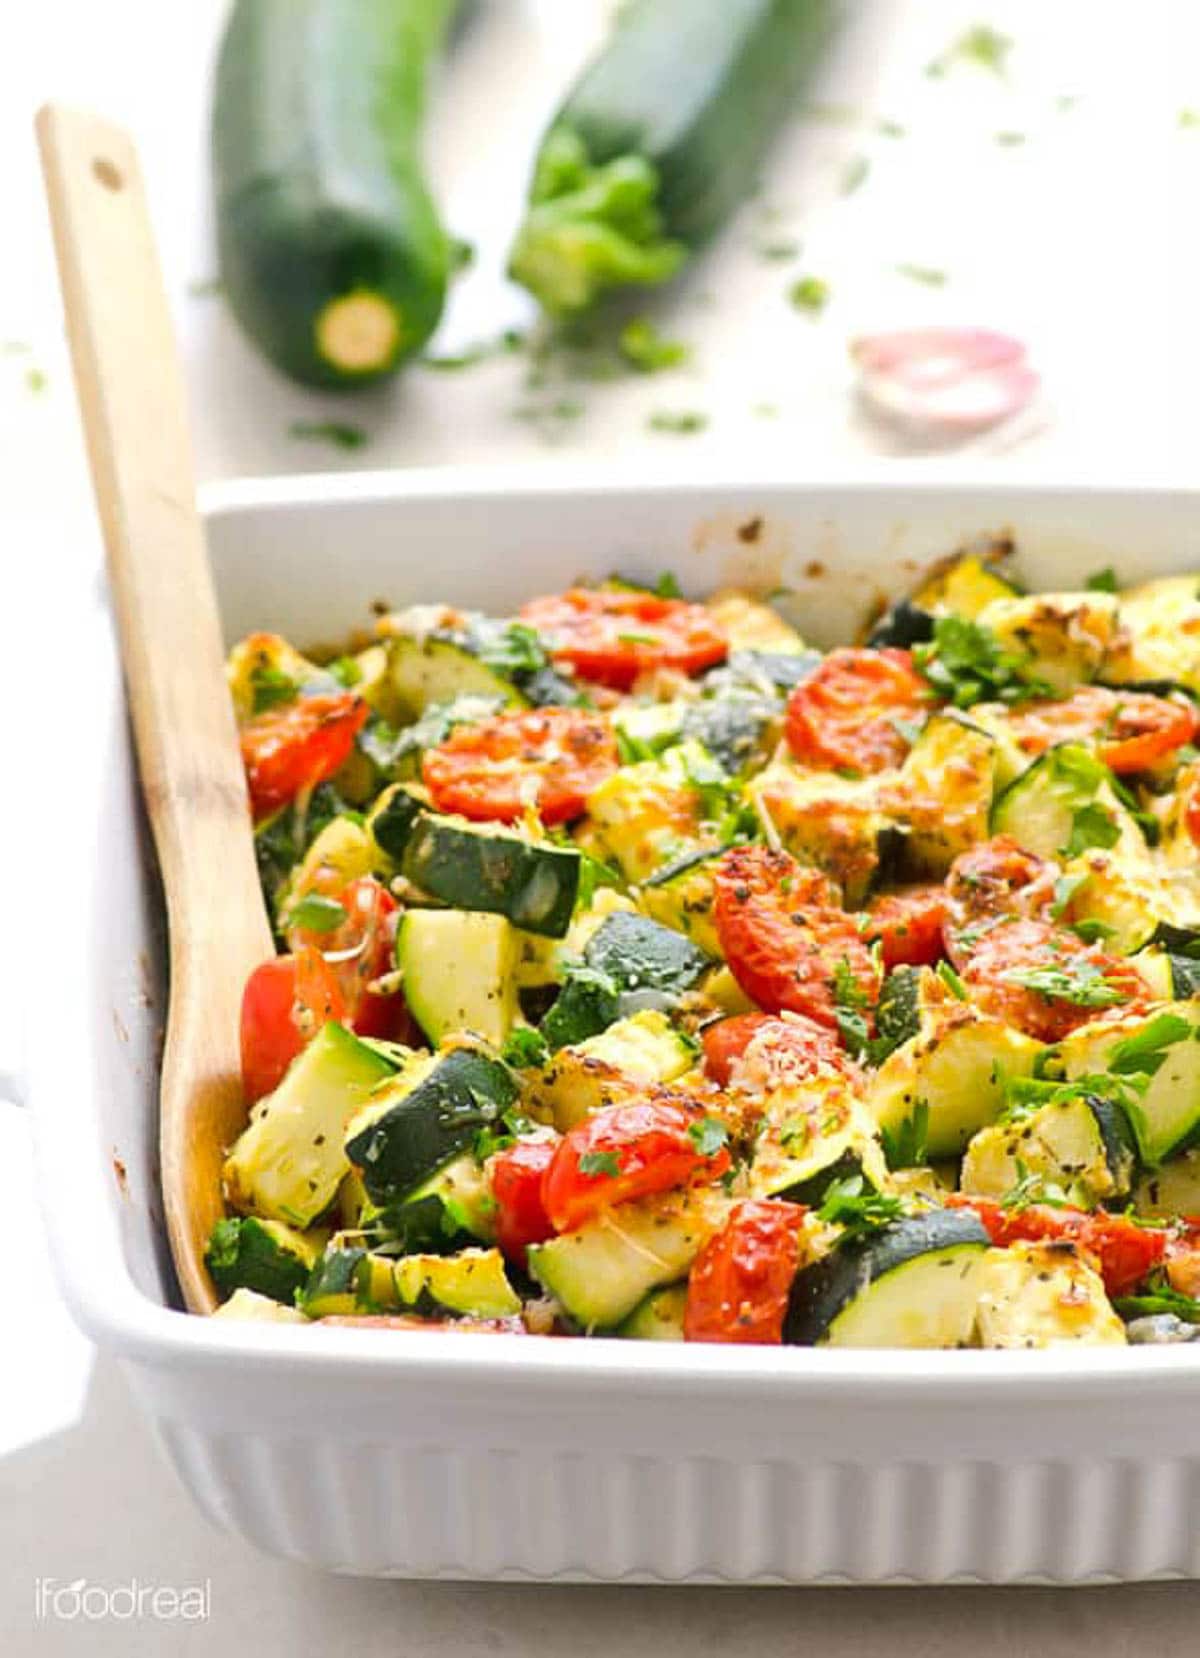 Zucchini tomato bake in white baking dish with wooden spoon.